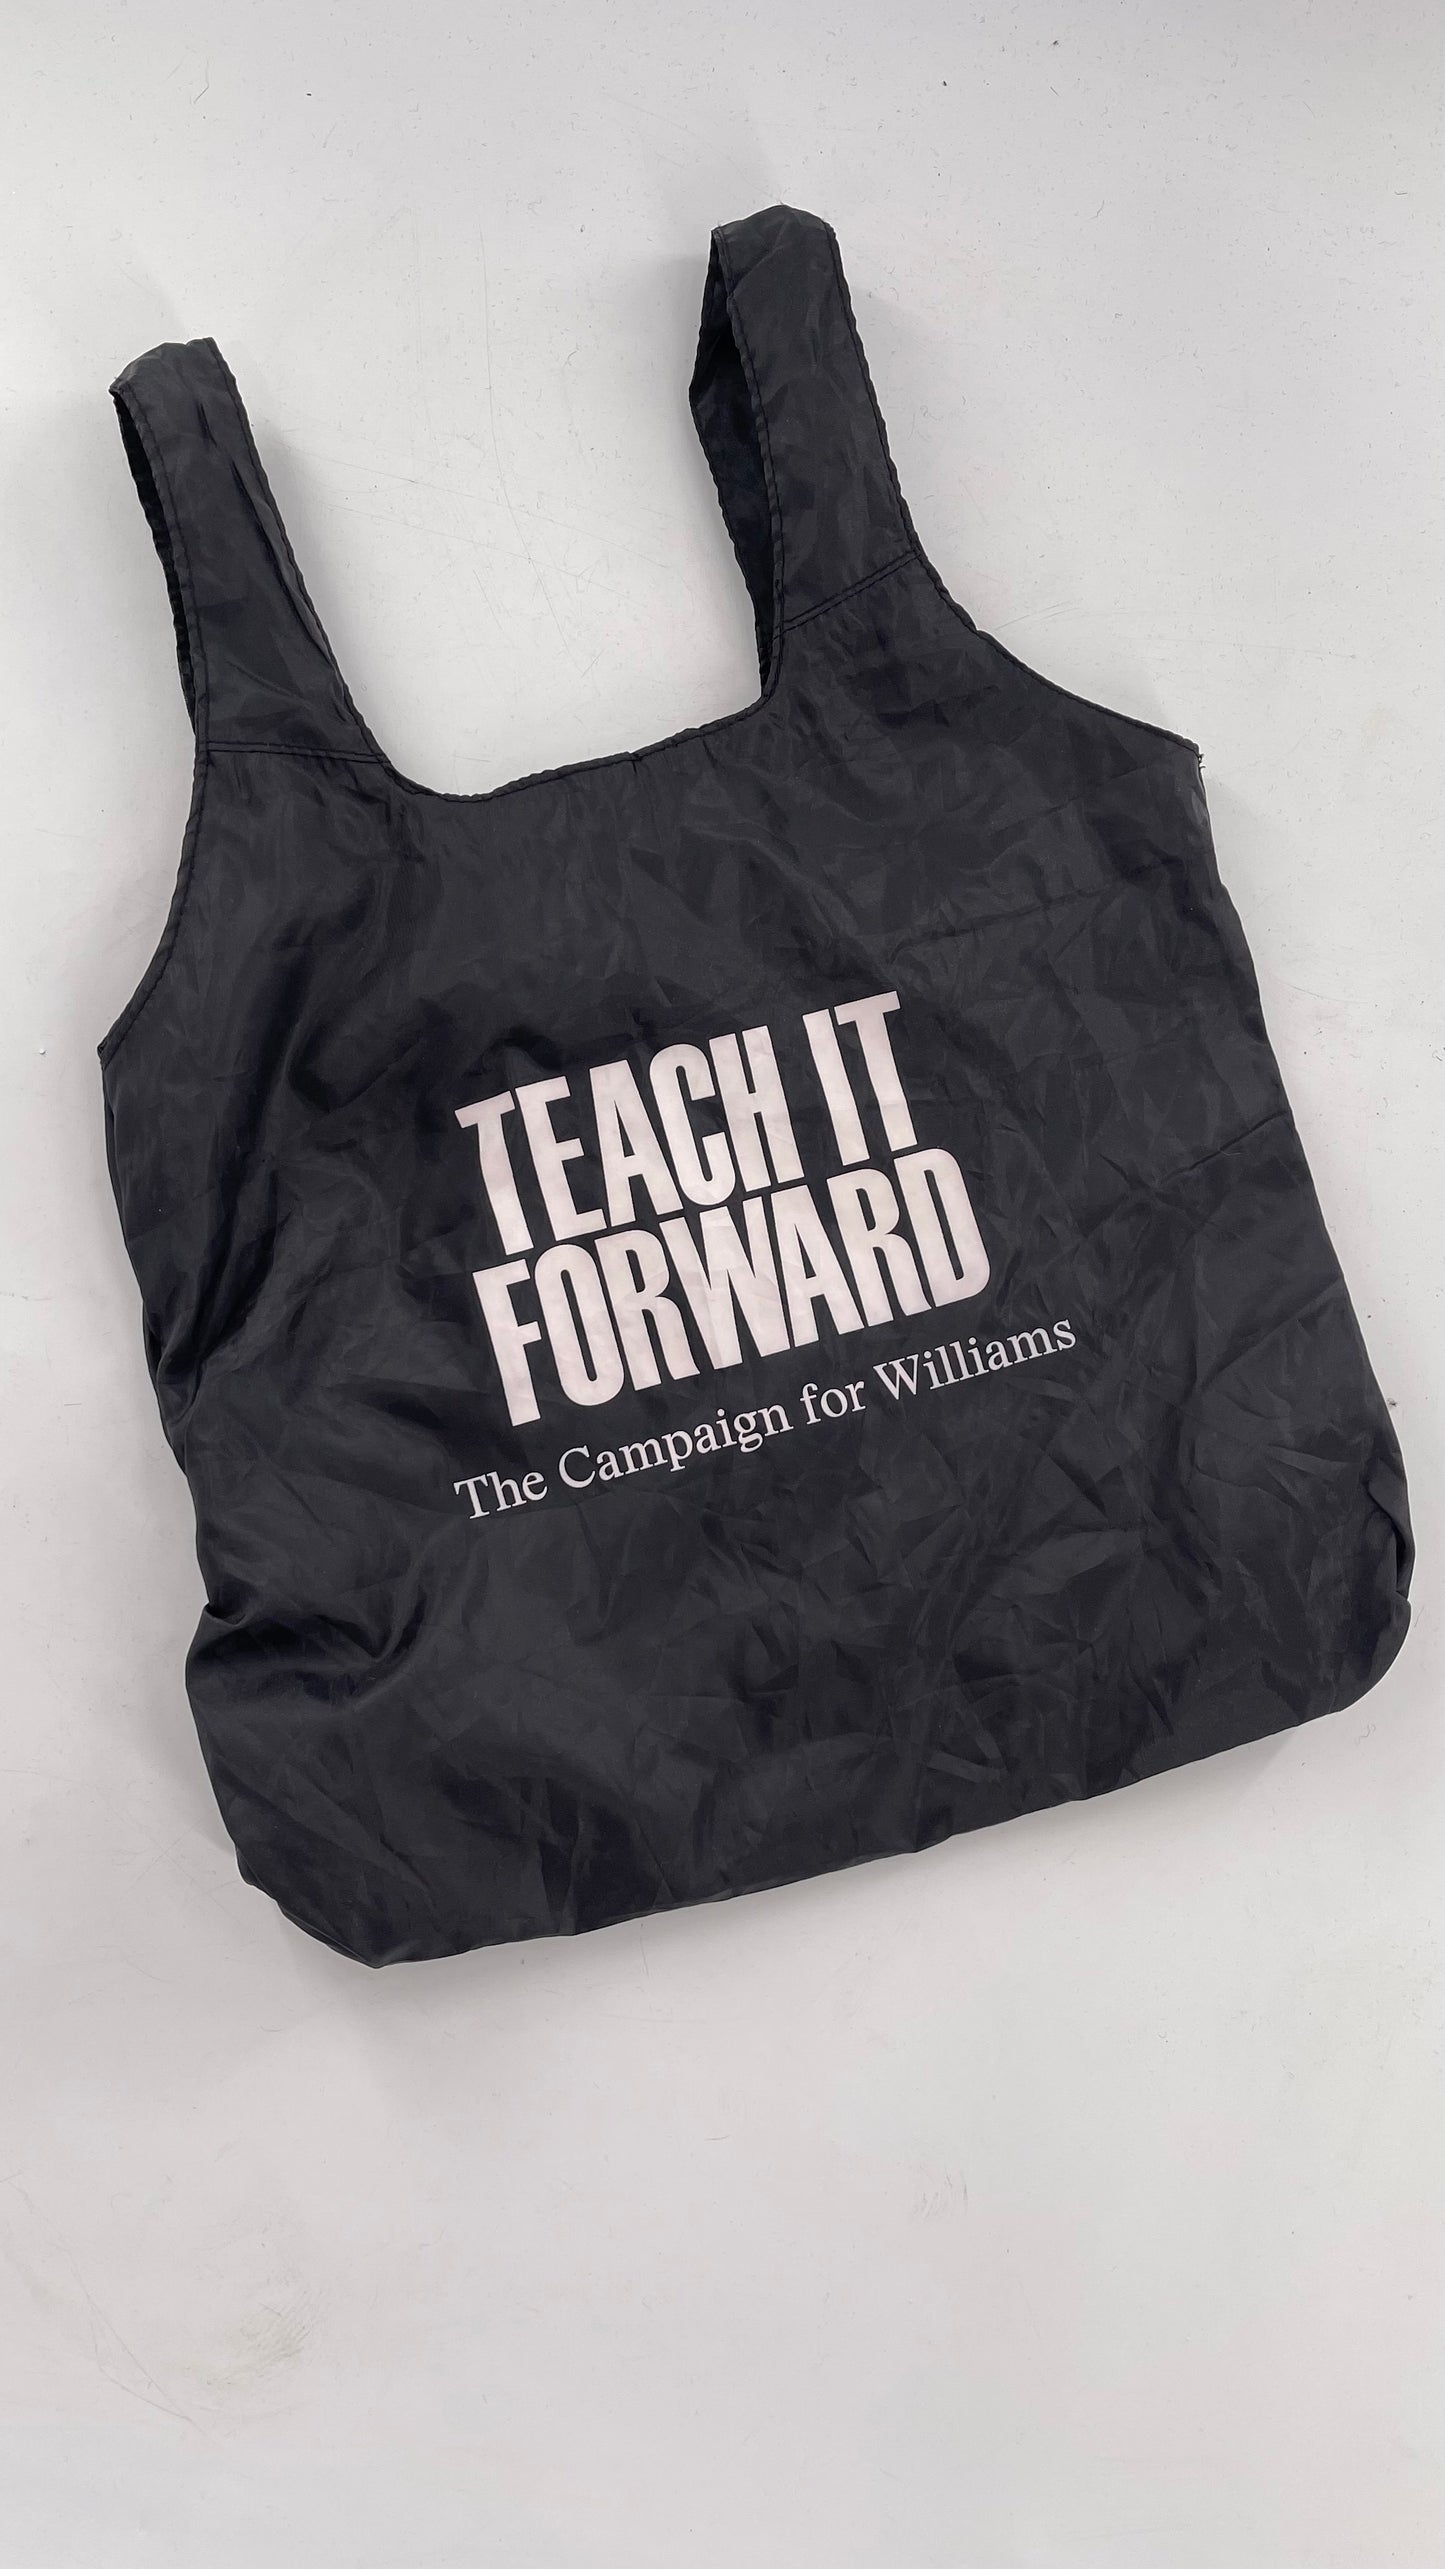 Vintage Black Teach it Forward Packable Tote with Tags Attached